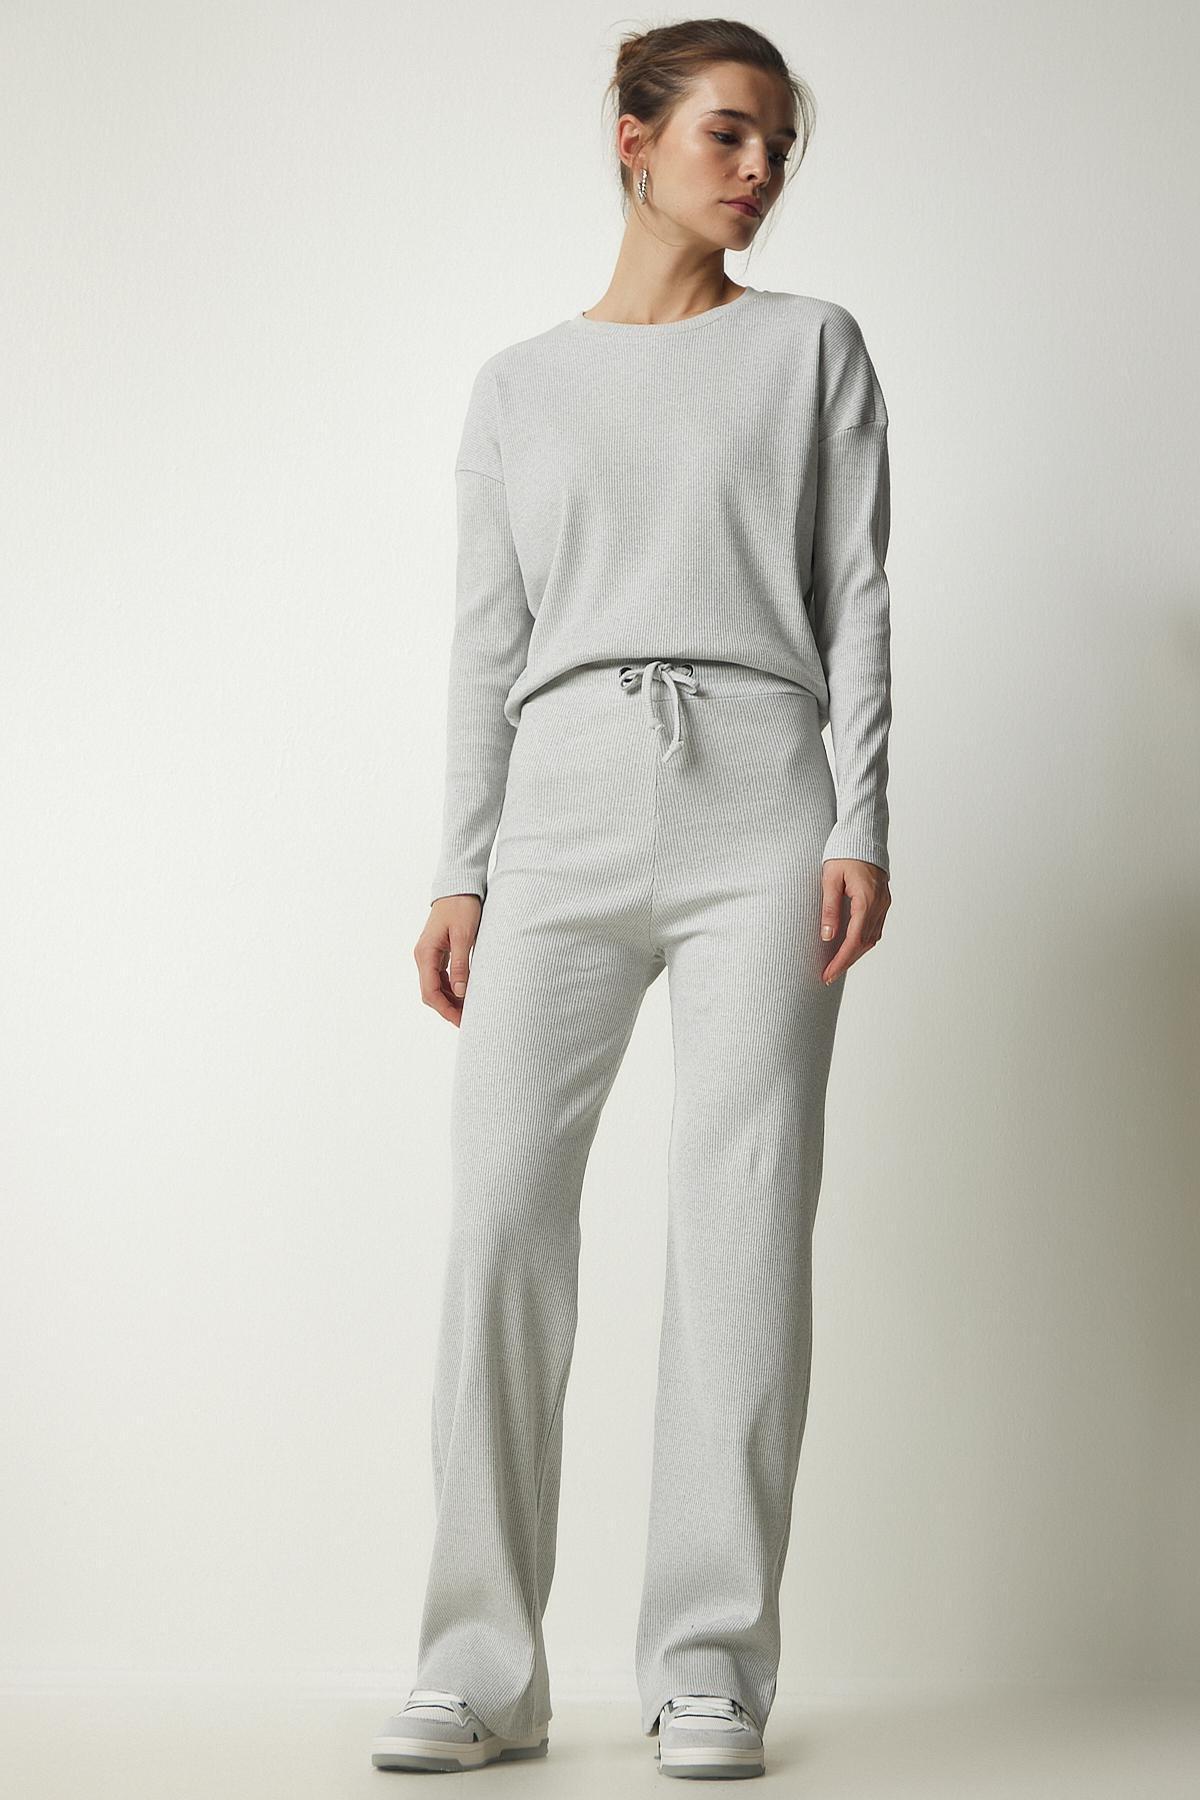 Happiness Istanbul - Grey Casual Ribbed Co-Ord Set